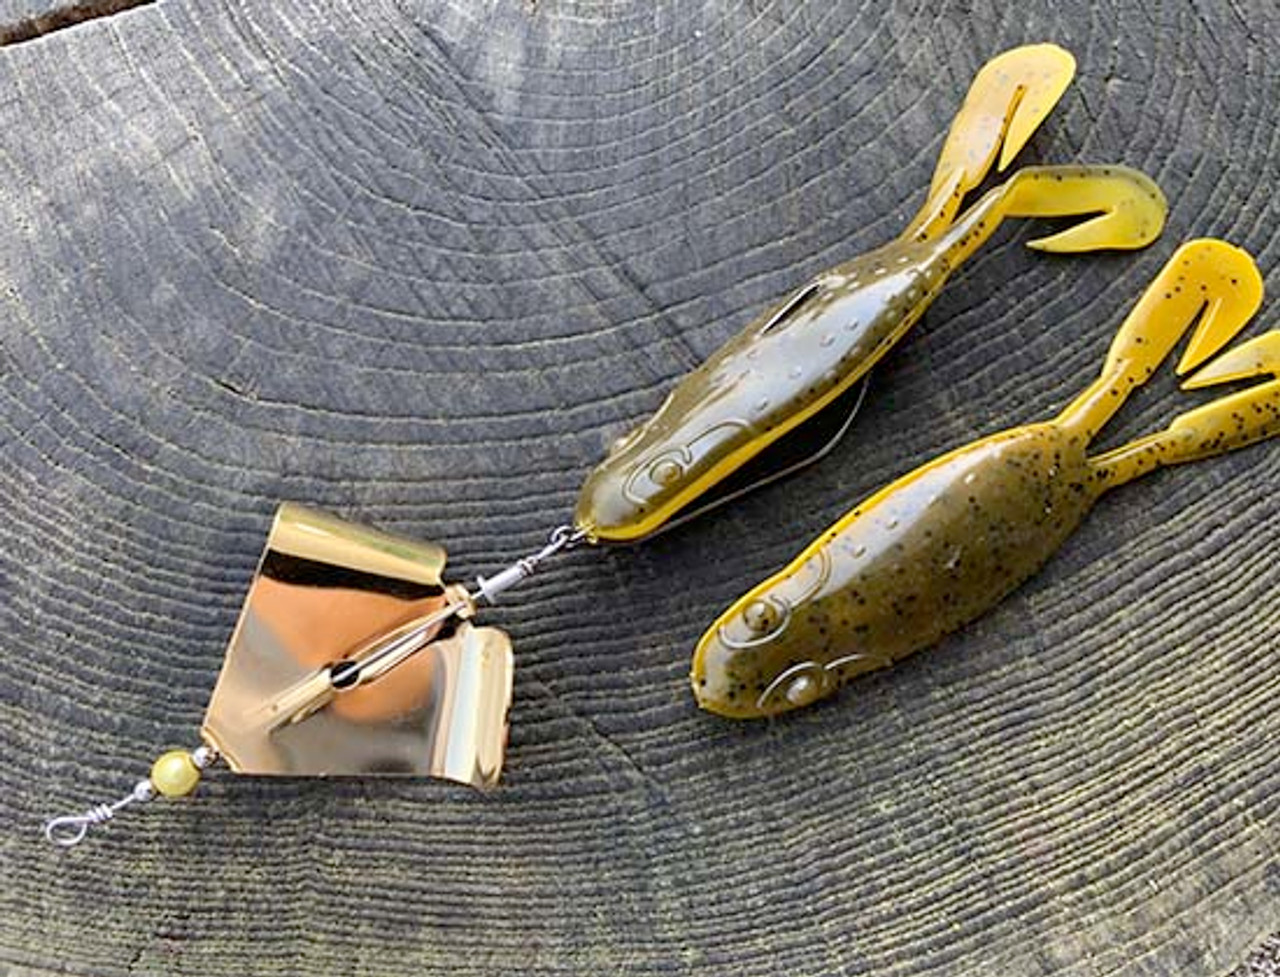 Venom Lures In-Line Hammer Toad Buzzbait - Green Pumpkin Yellow Belly with Silver Blade 